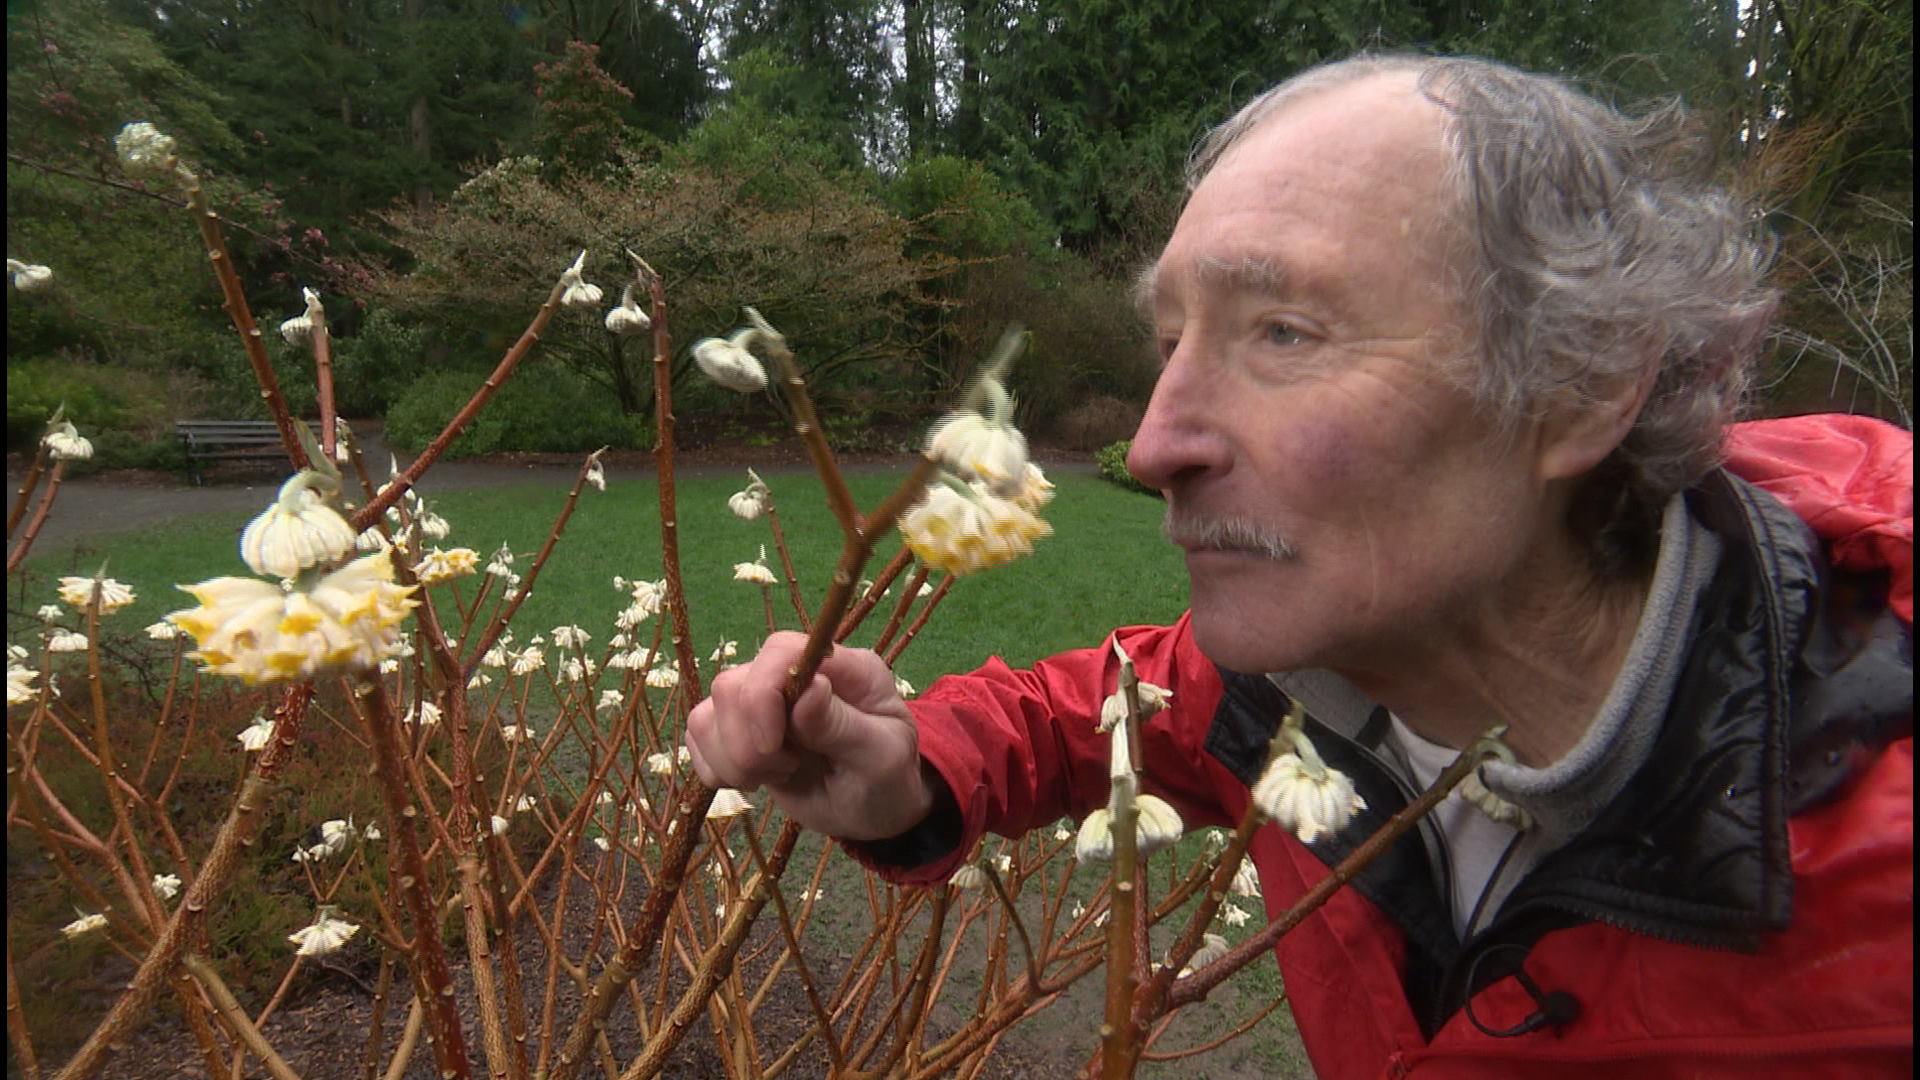 Ciscoe Morris shares his favorite flowers for lighting up dreary day 🌾 #k5evening